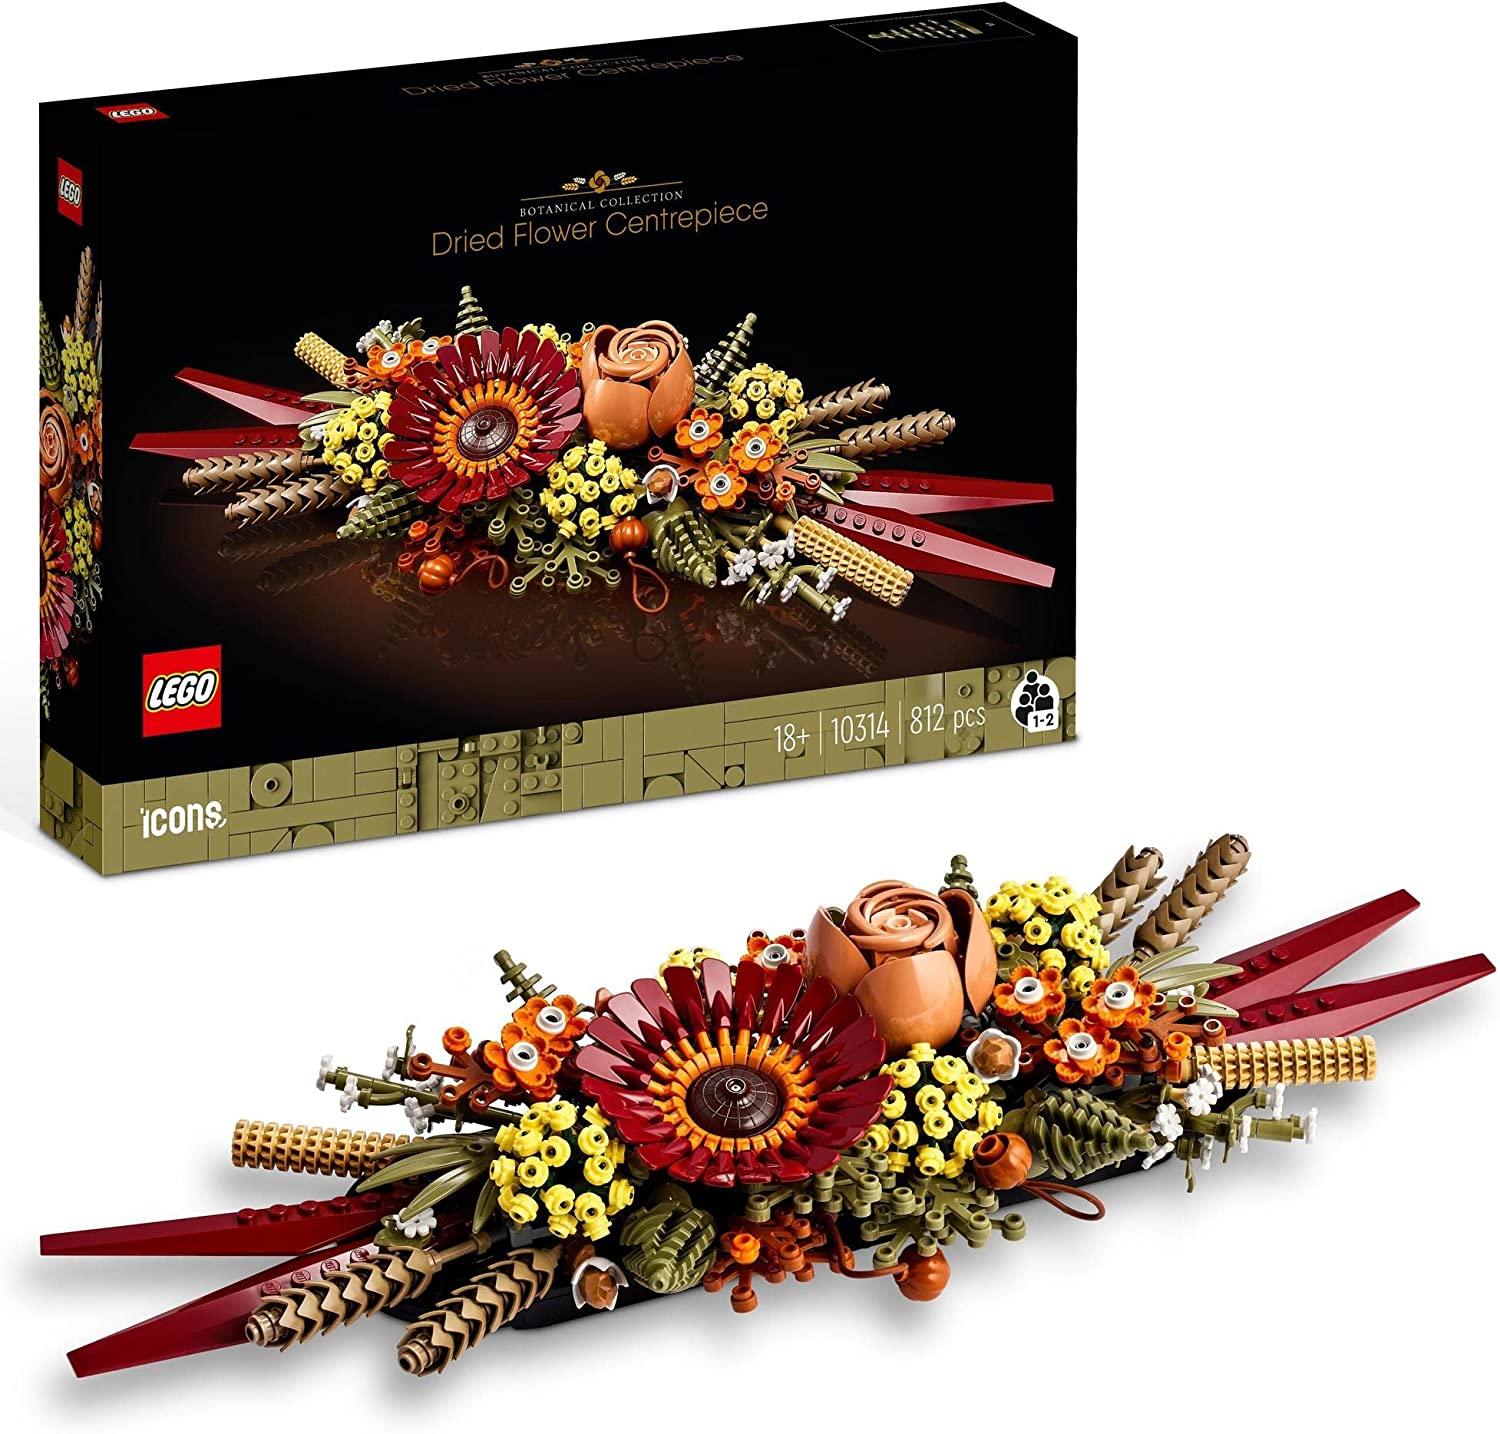 LEGO Icons Botanical Collection 10314 Dried Flower Centrepiece - GD Games 